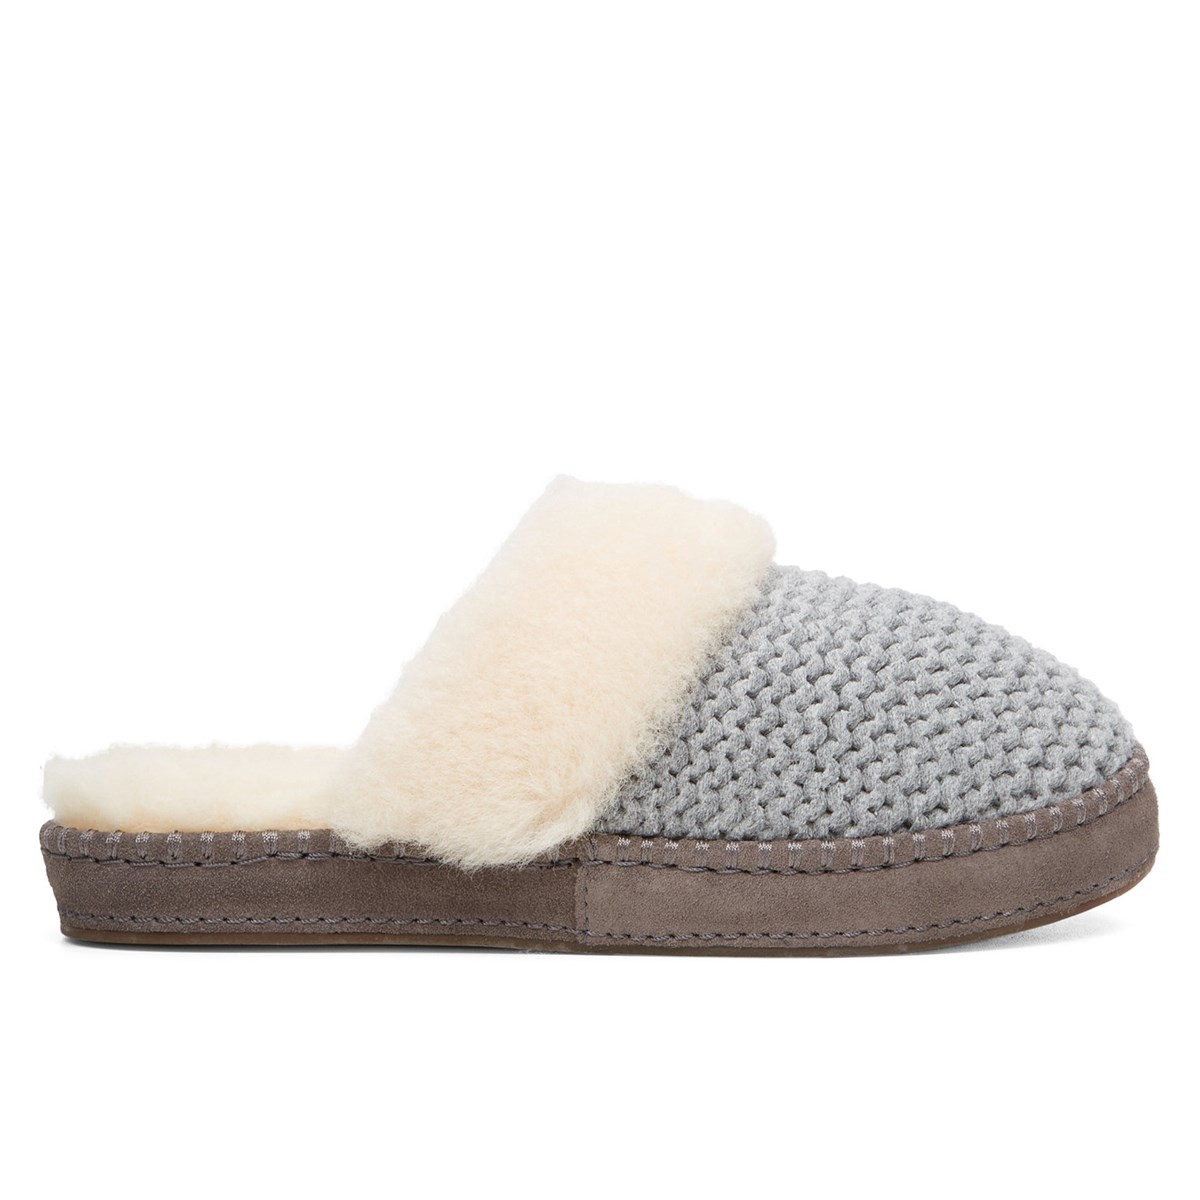 ugg aira slippers size 9